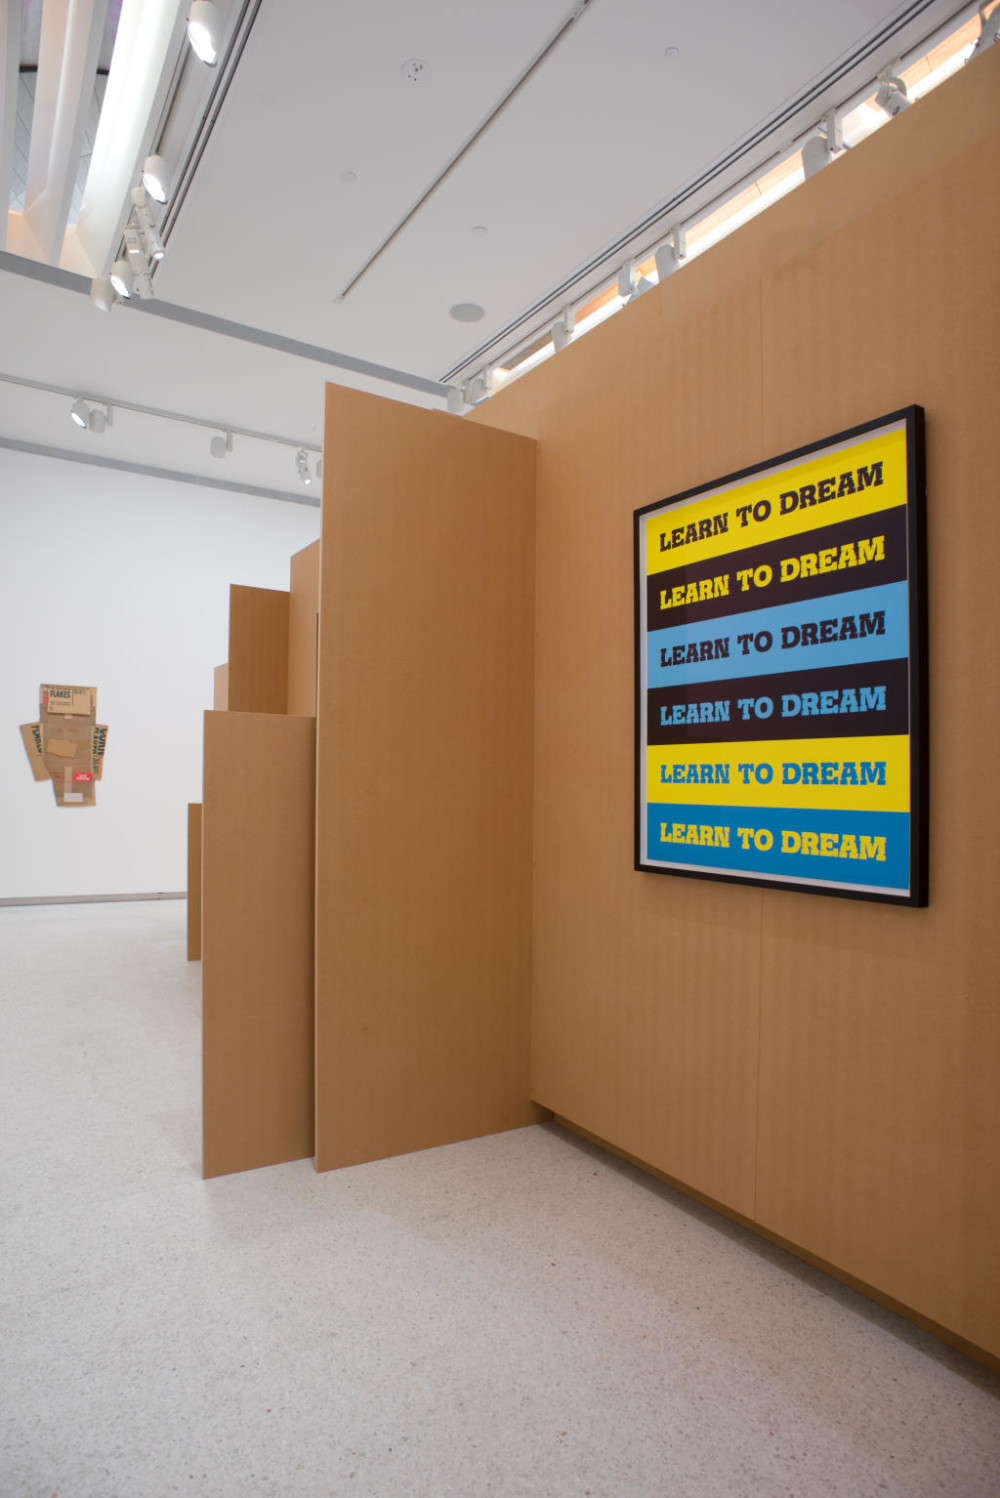 The image shows the other side of the freestanding cardboard structure. On a wall of the structure hangs a screenprint consisting of blue, yellow and black horizontal stripes, each of which has 'LEARN TO DREAM' written in capitals in black, yellow and blue on each stripe so it repeats across the entire print. On the wall of the main gallery space in the background, a 2D work made up of found carboard scraps haphazardly arranged together can be seen. 